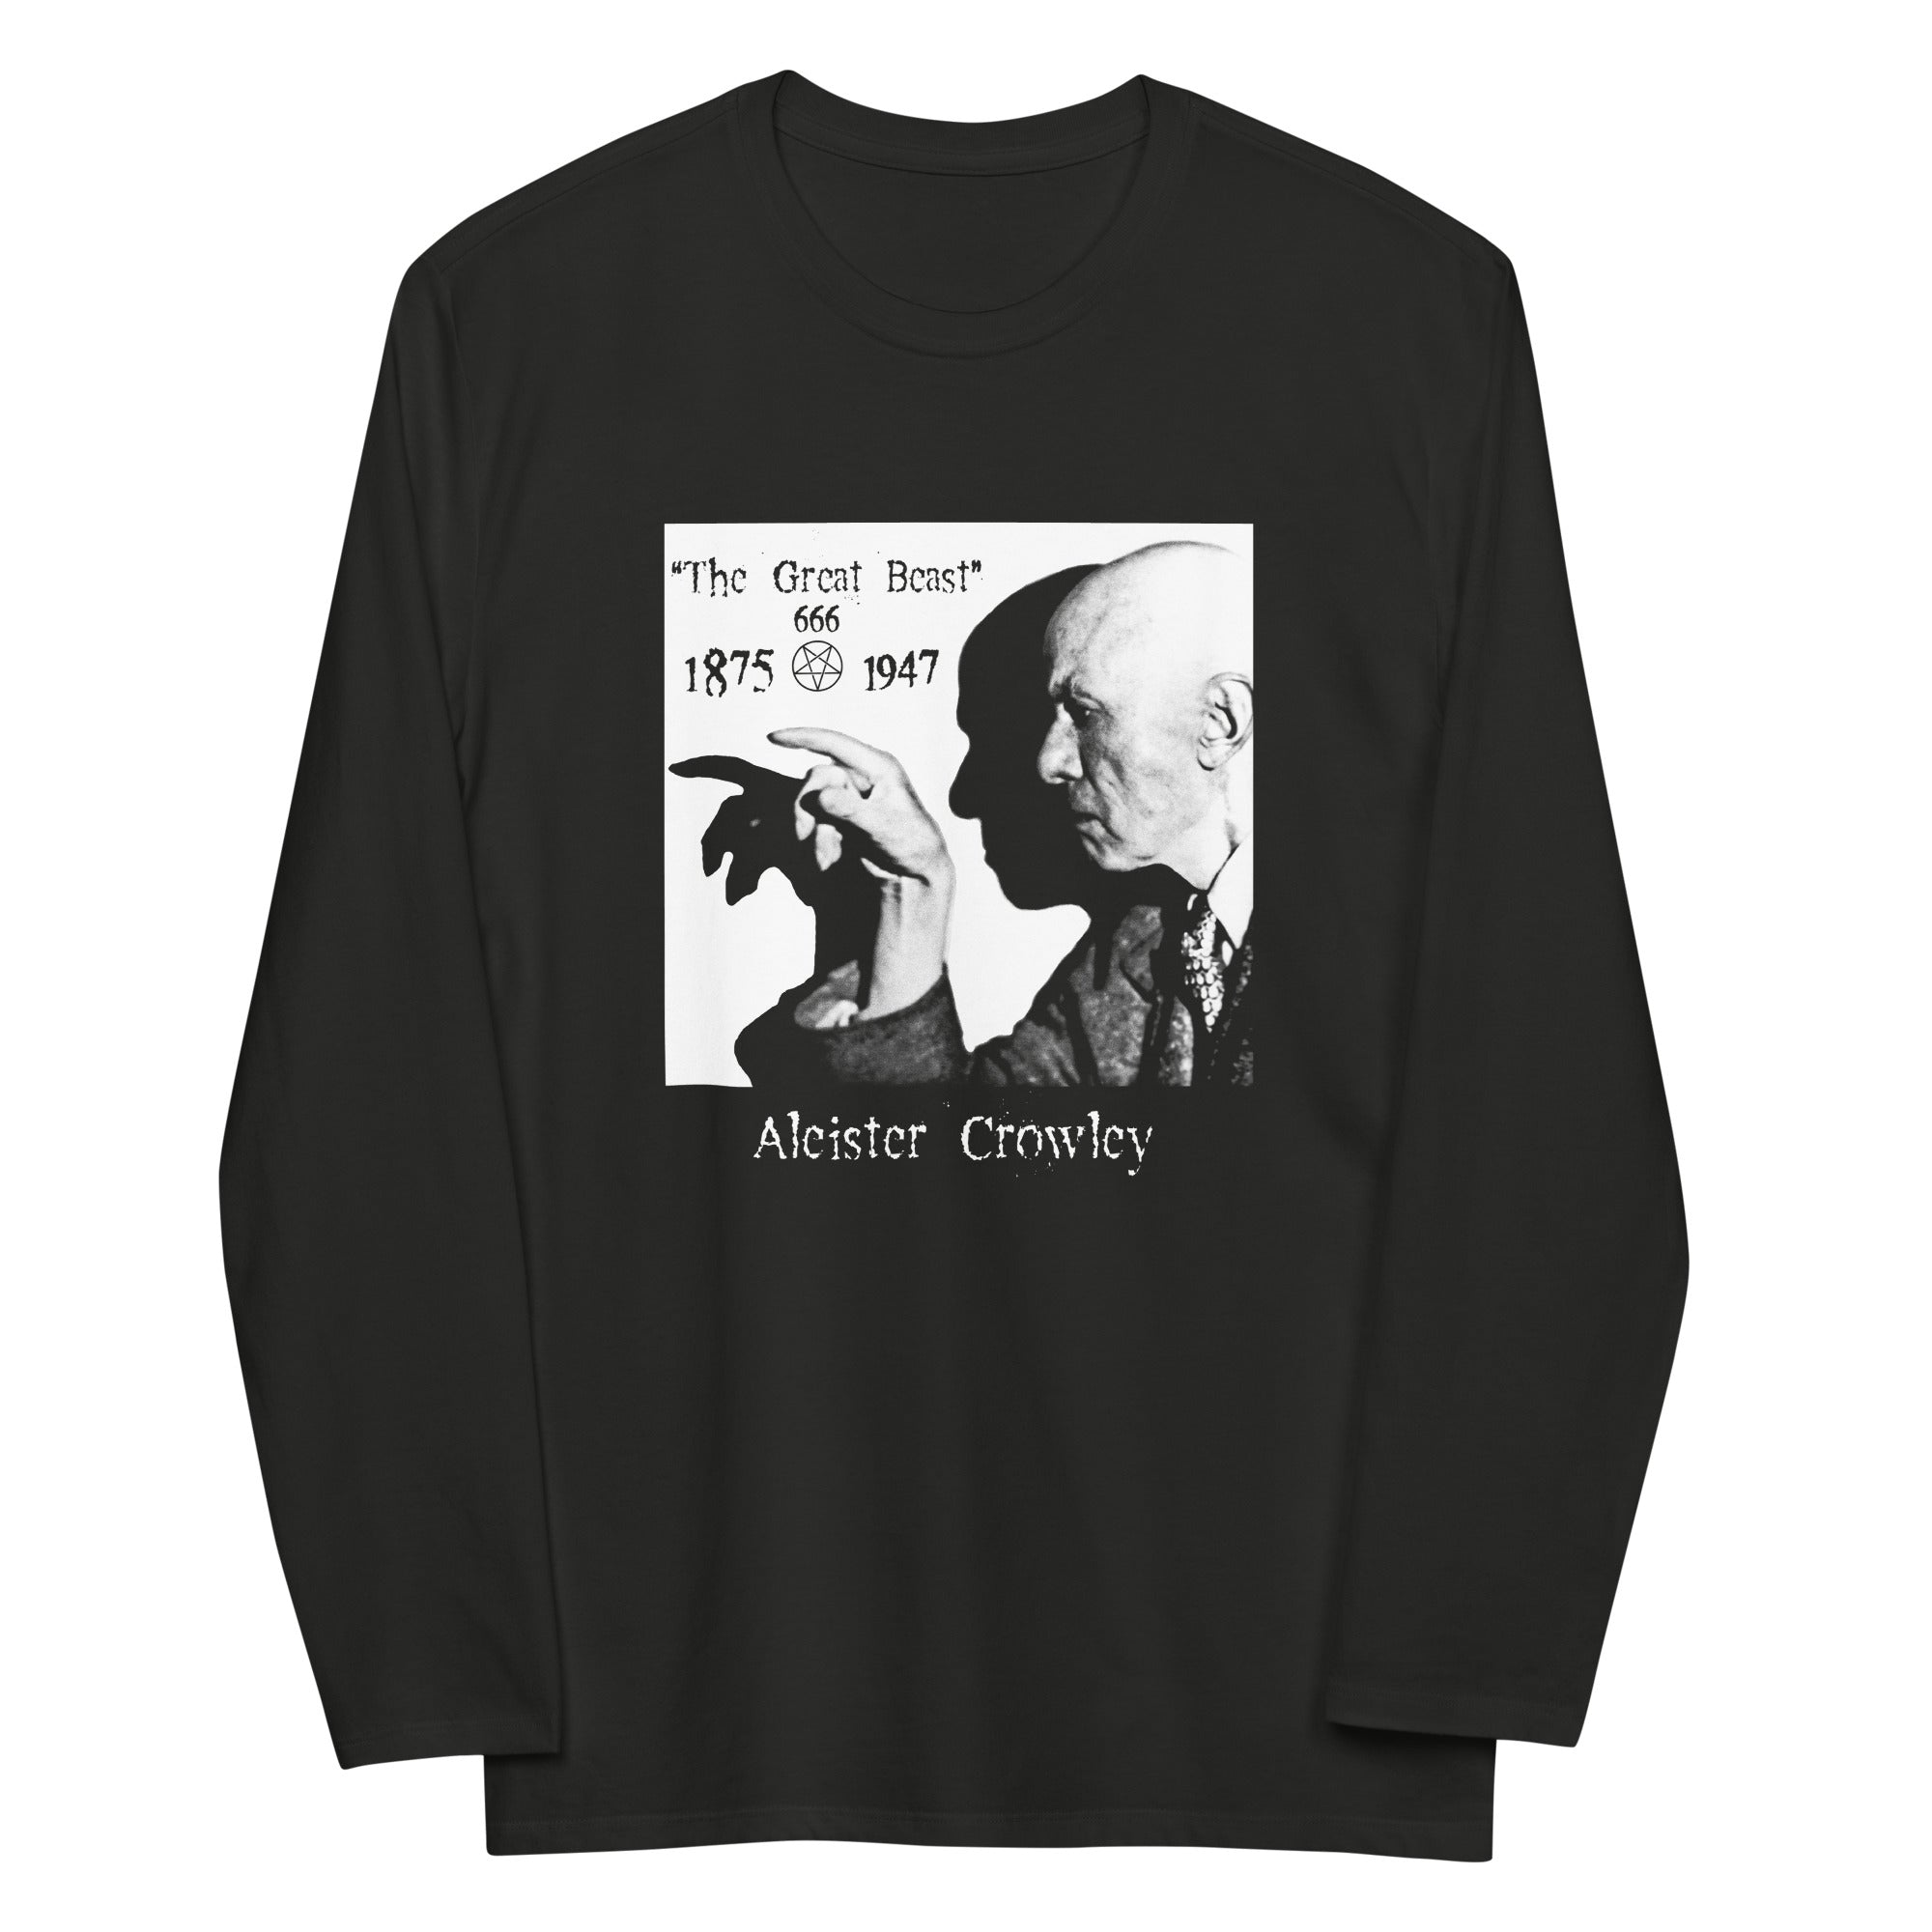 Aleister Crowley Infamous Occult Leader of Thelema Sex Magic Fashion Long Sleeve Shirt - Edge of Life Designs